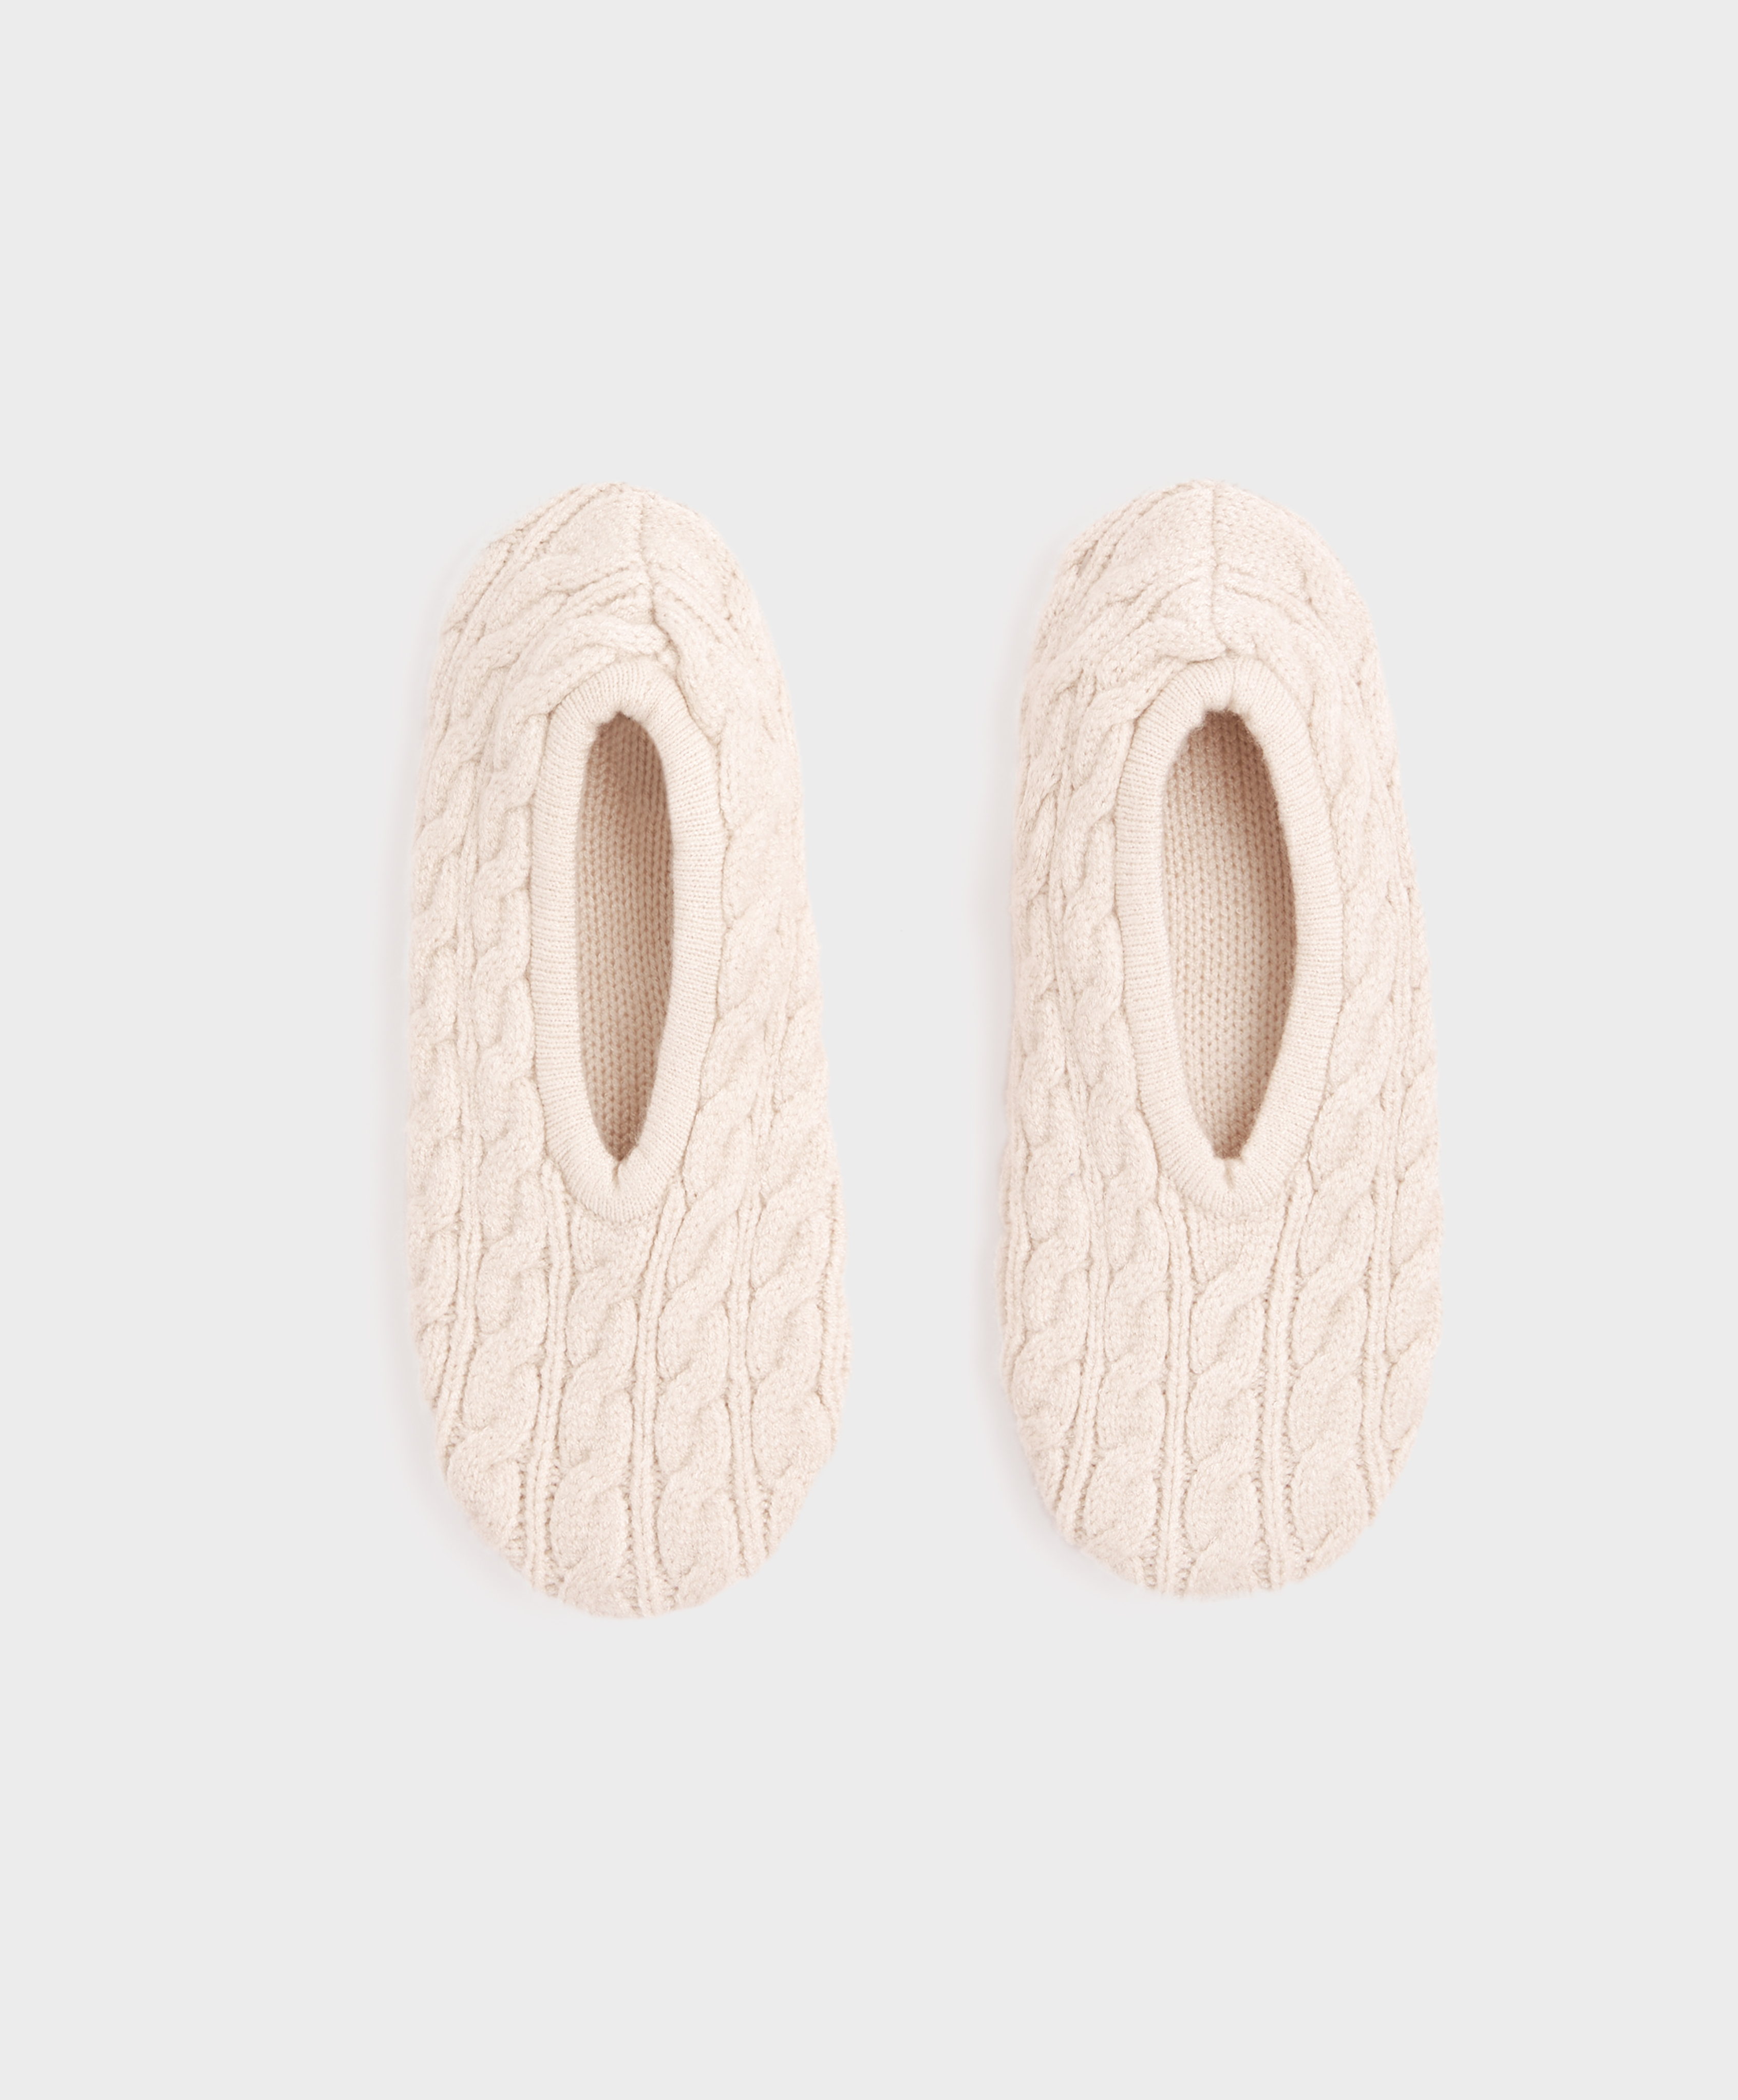 Chunky knit slippers